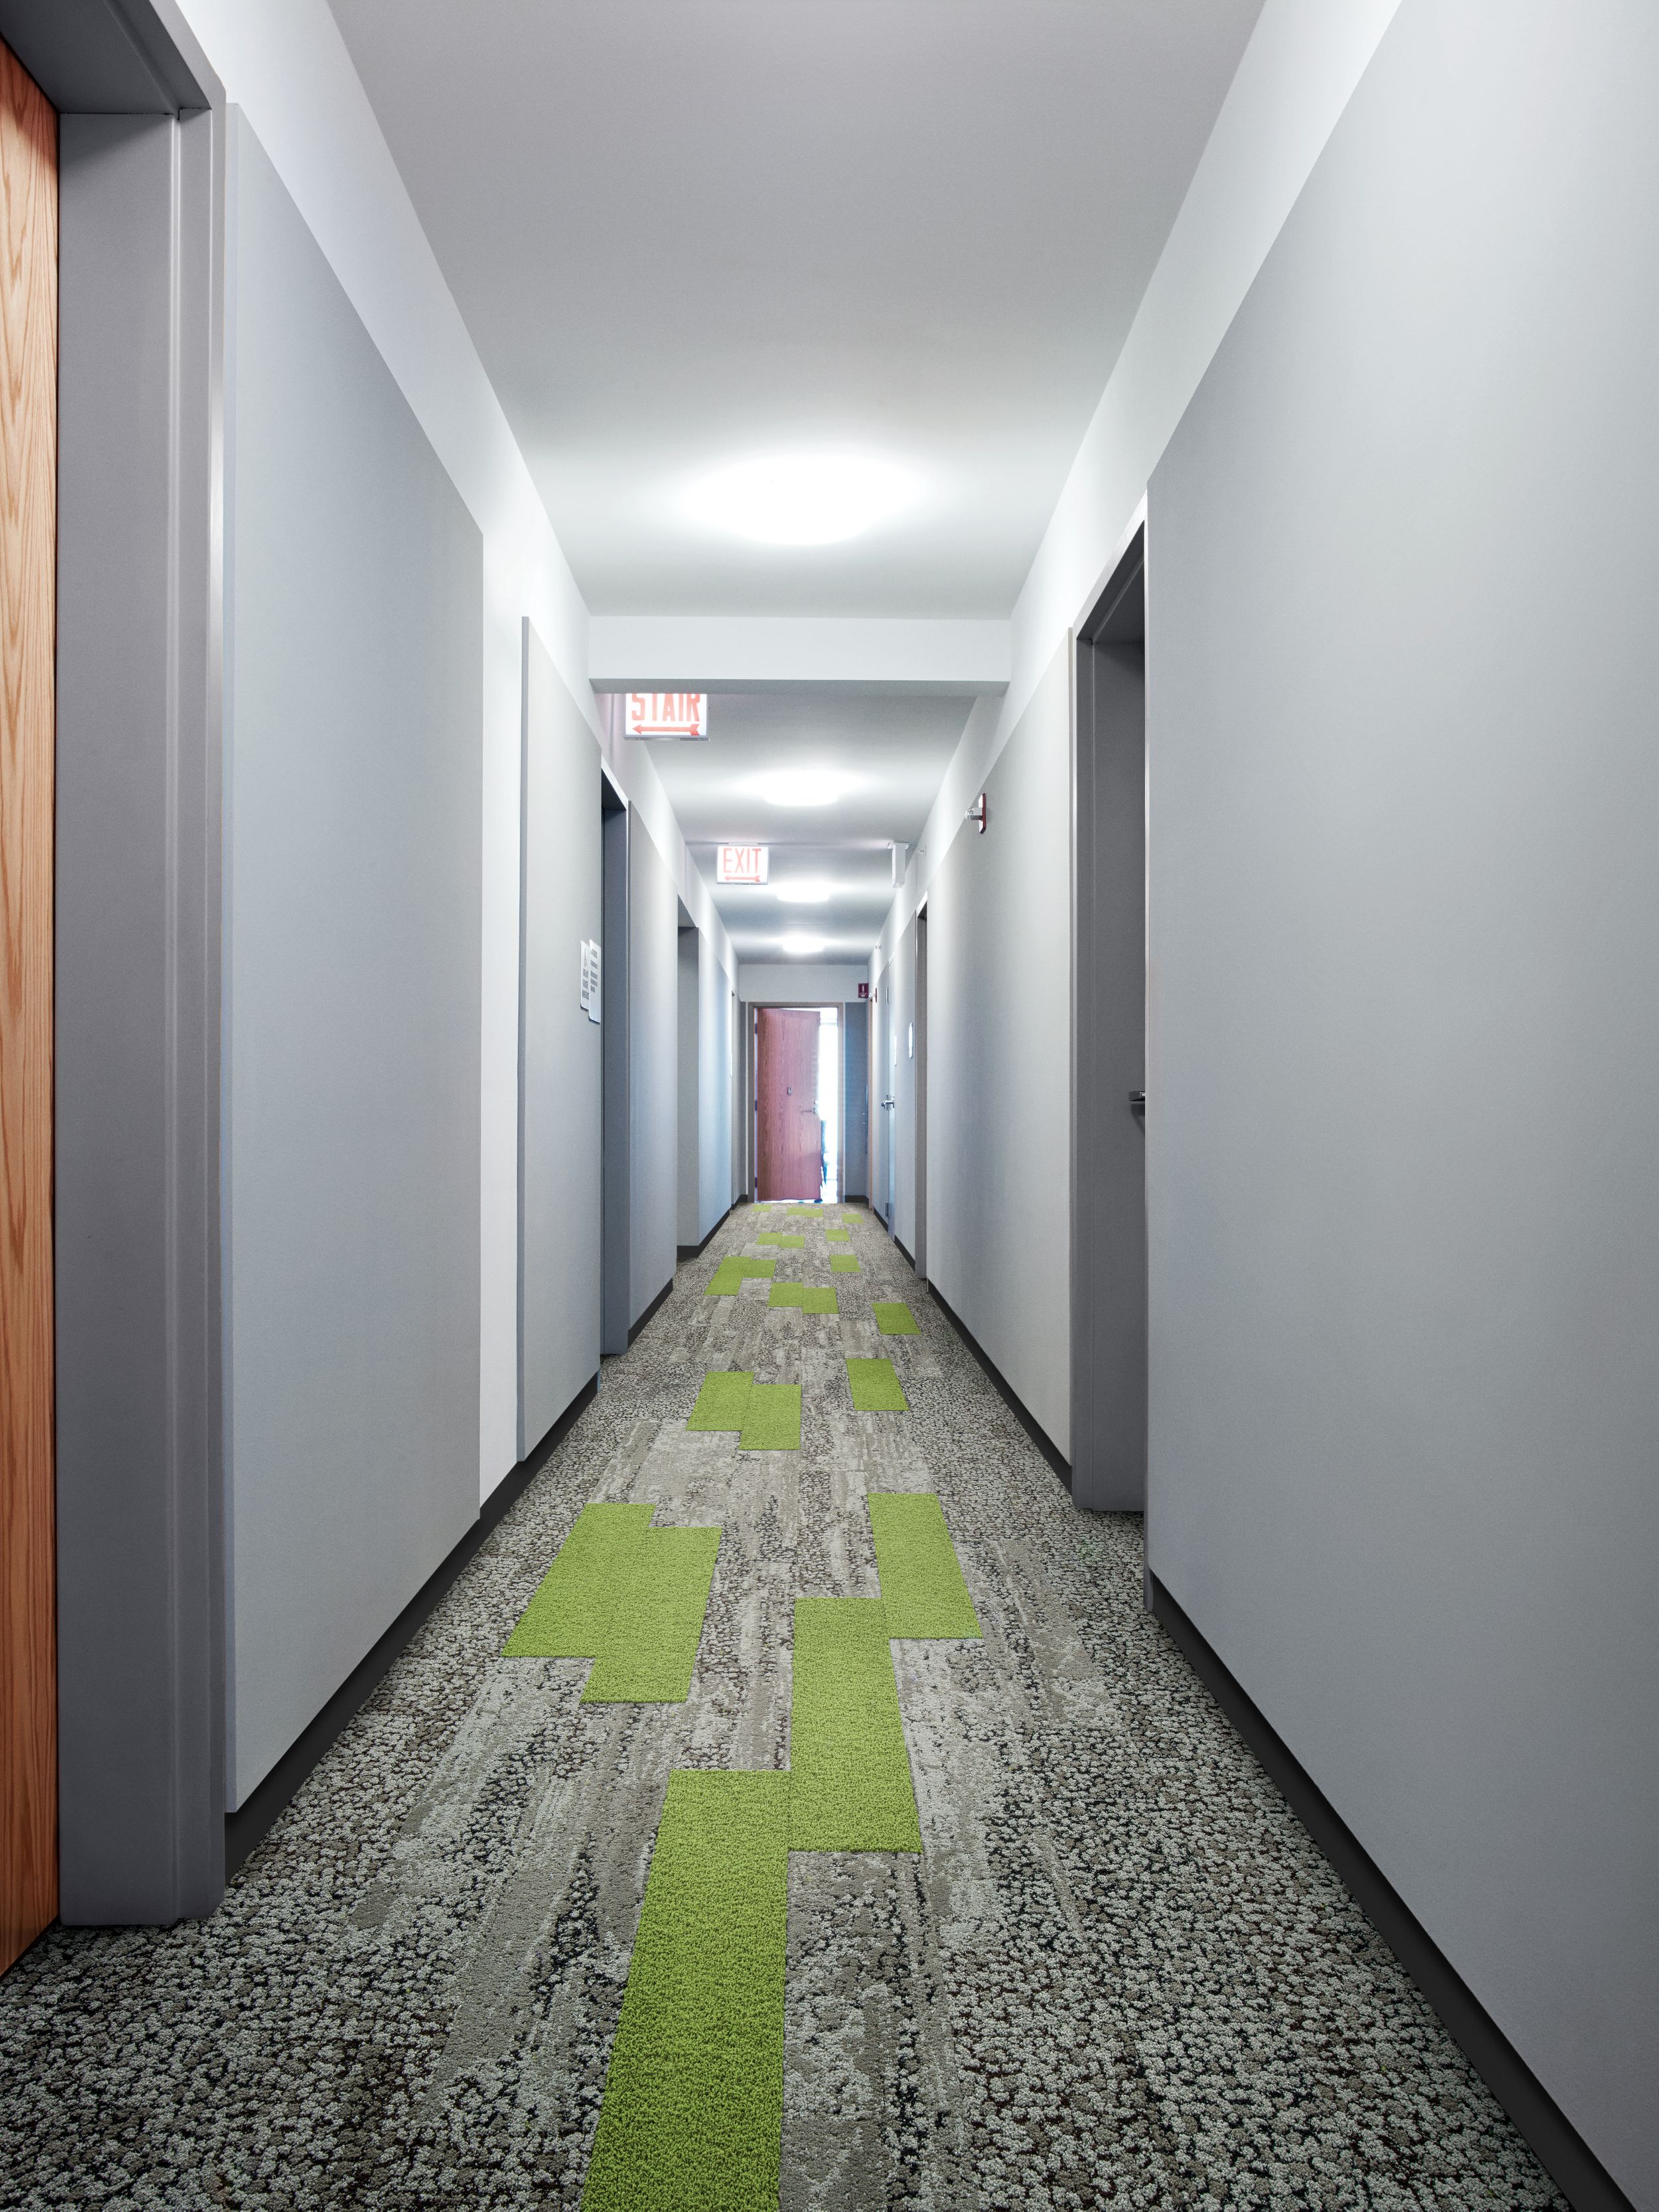 Interface HN830 and HN850 plank carpet tiles in long corridor with mutliple doors and wood door at end image number 6